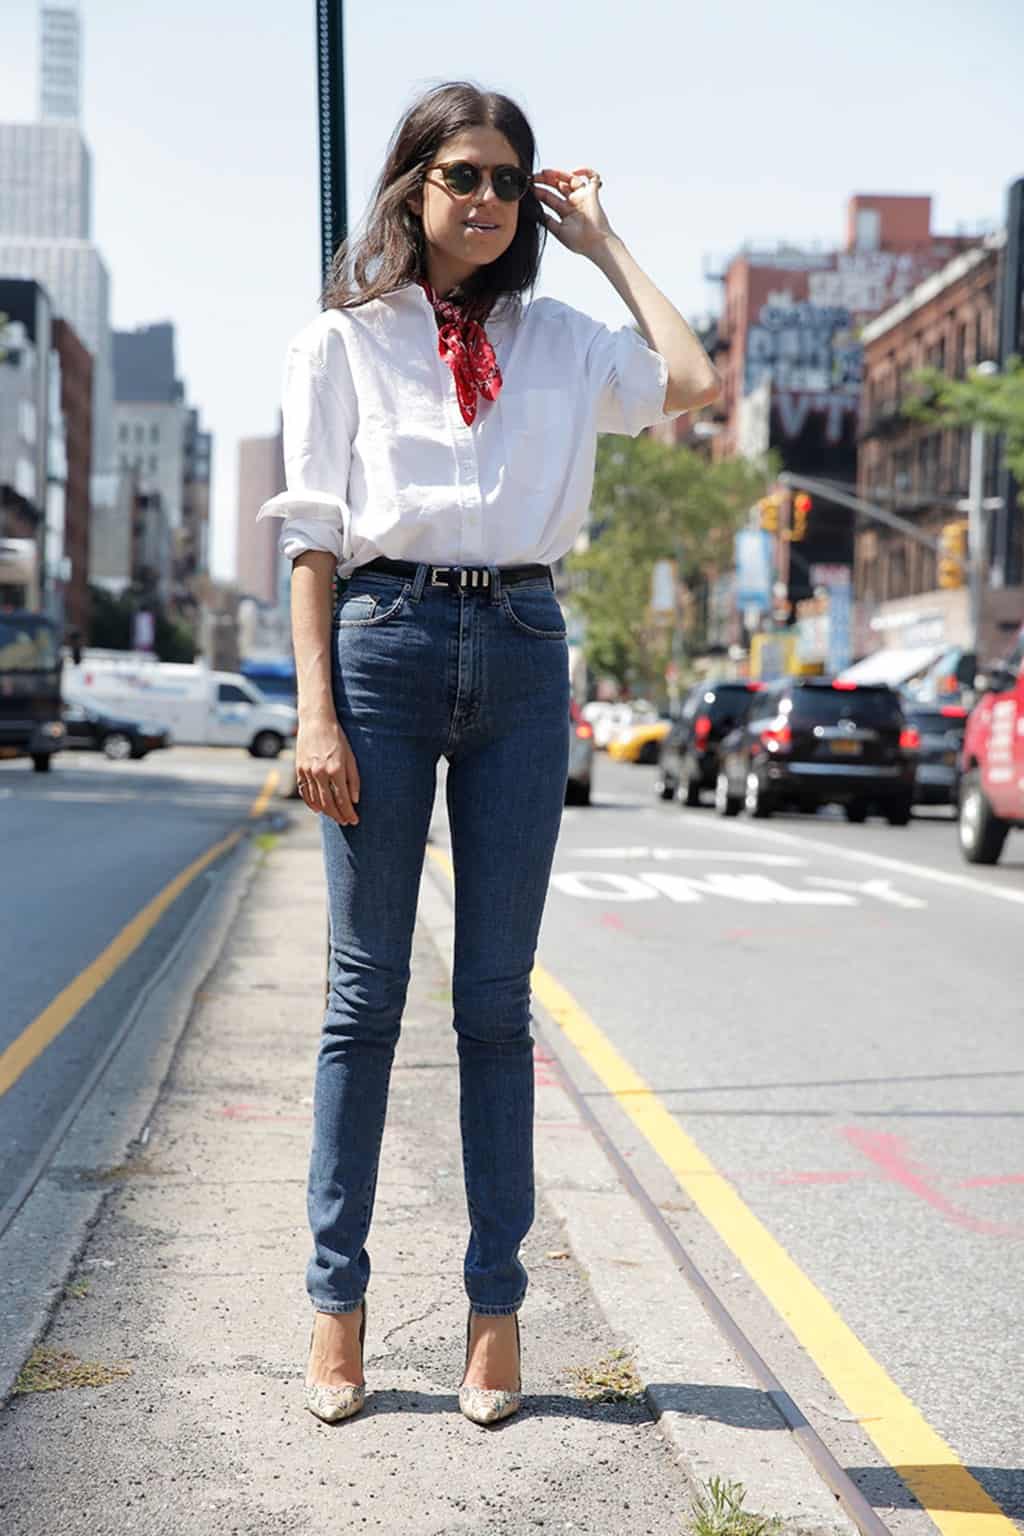 High waisted jeans with button up blouse concert outfit idea